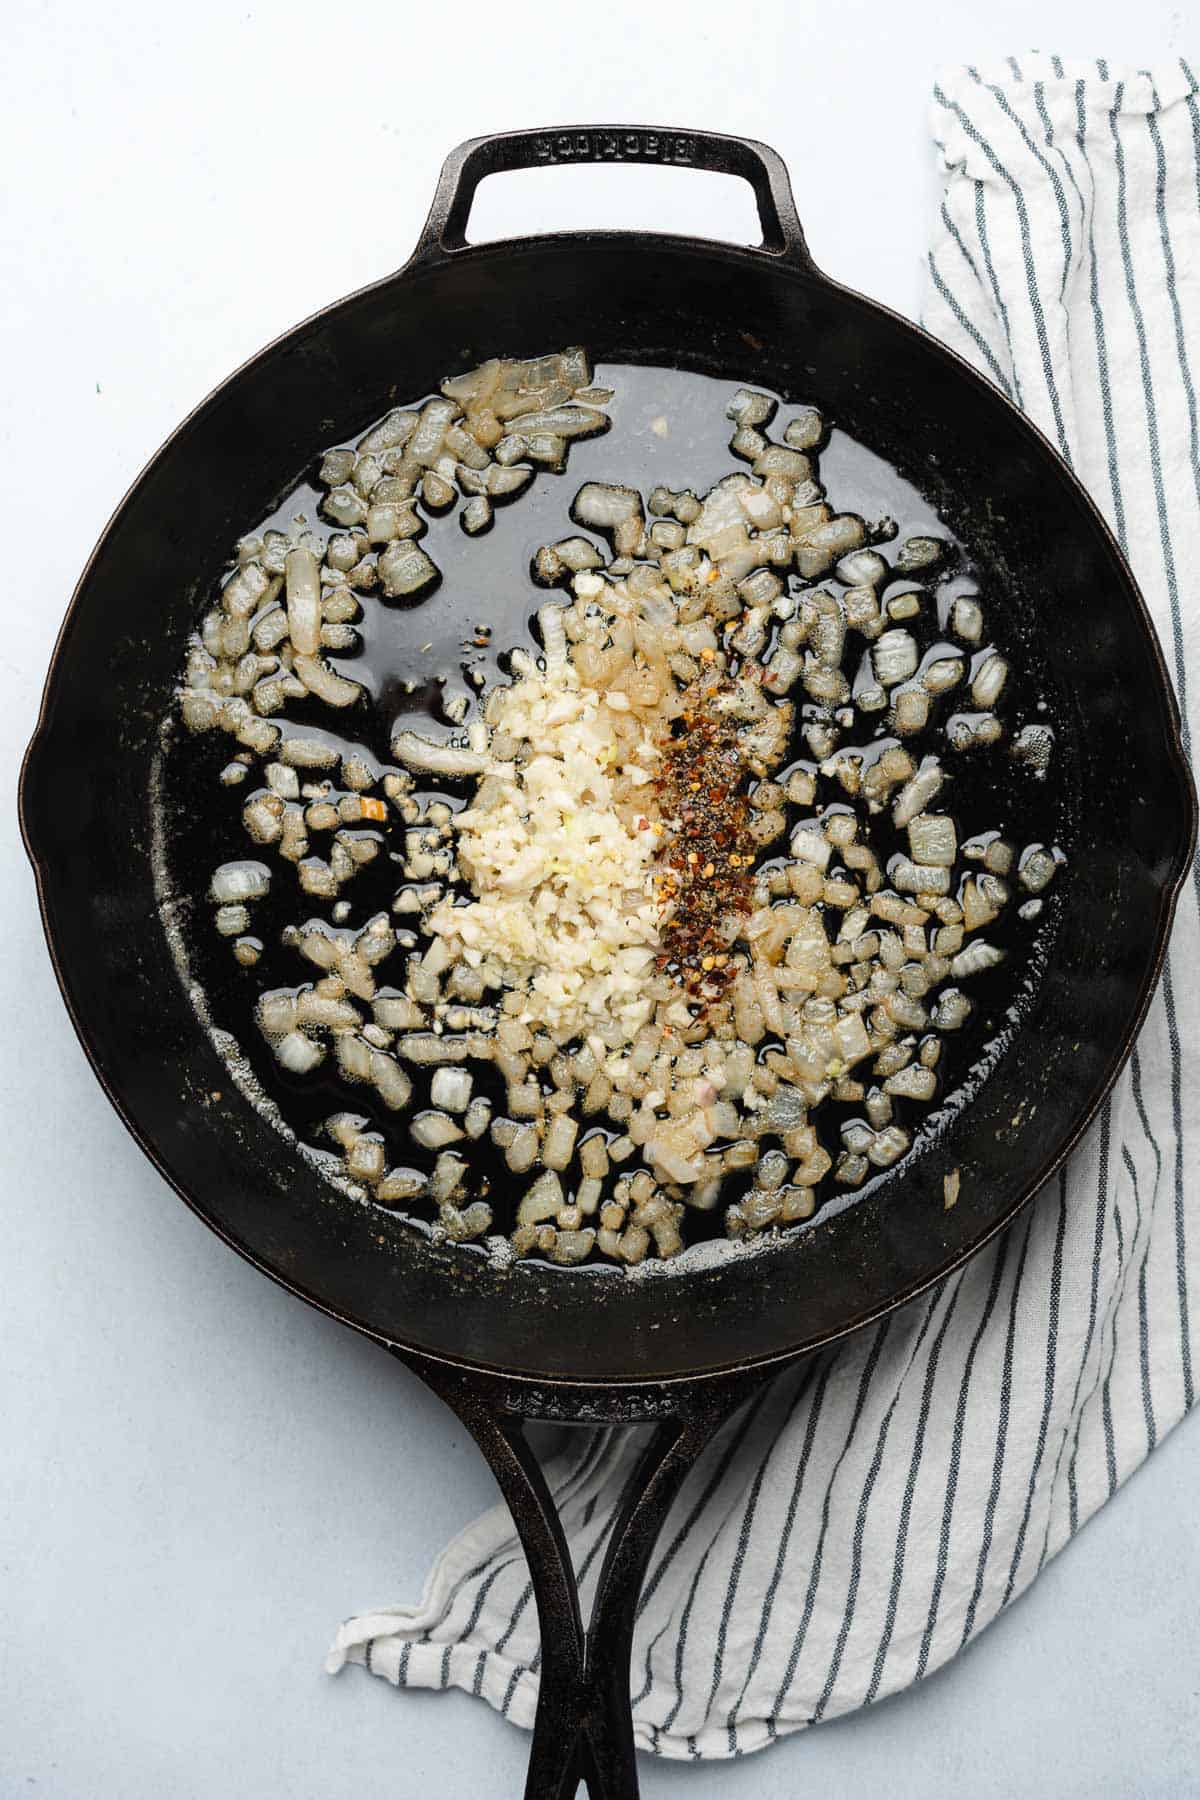 seasonings with garlic and onions in a cast iron skillet